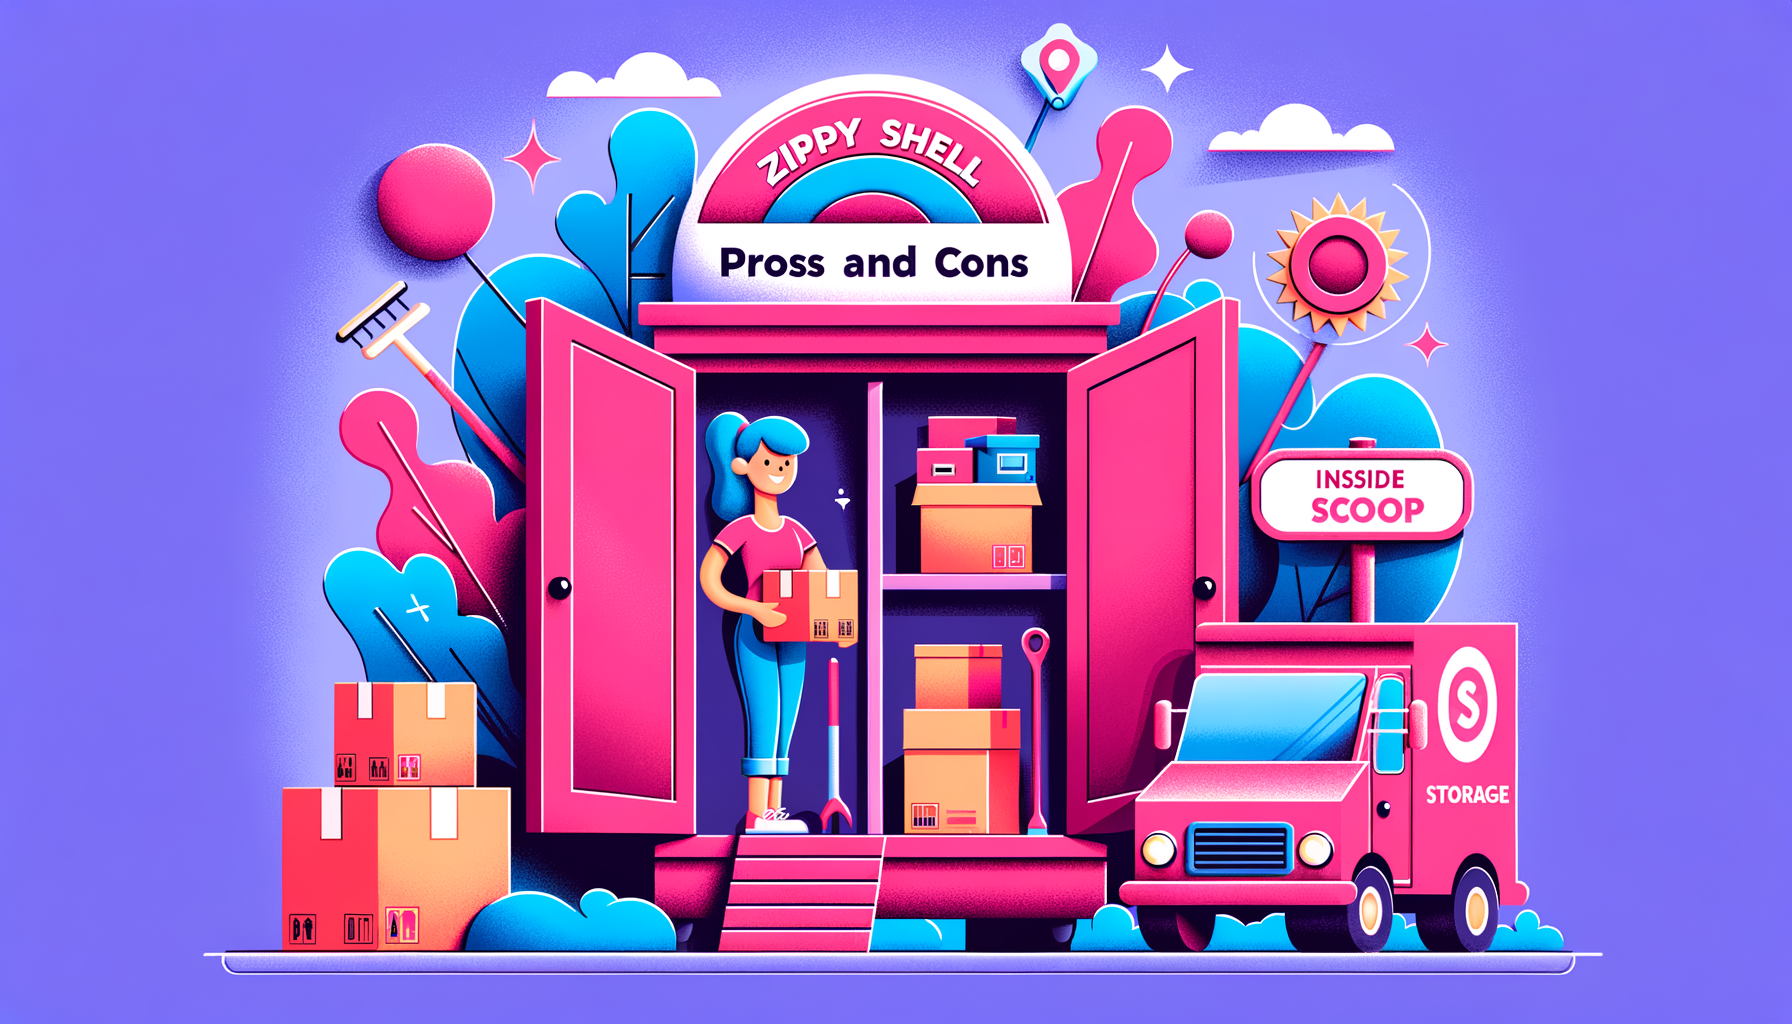 Cartoon illustration in fuschia tones showcasing pros and cons of Zippy Shell for storage, featuring happy and puzzled characters with storage containers.